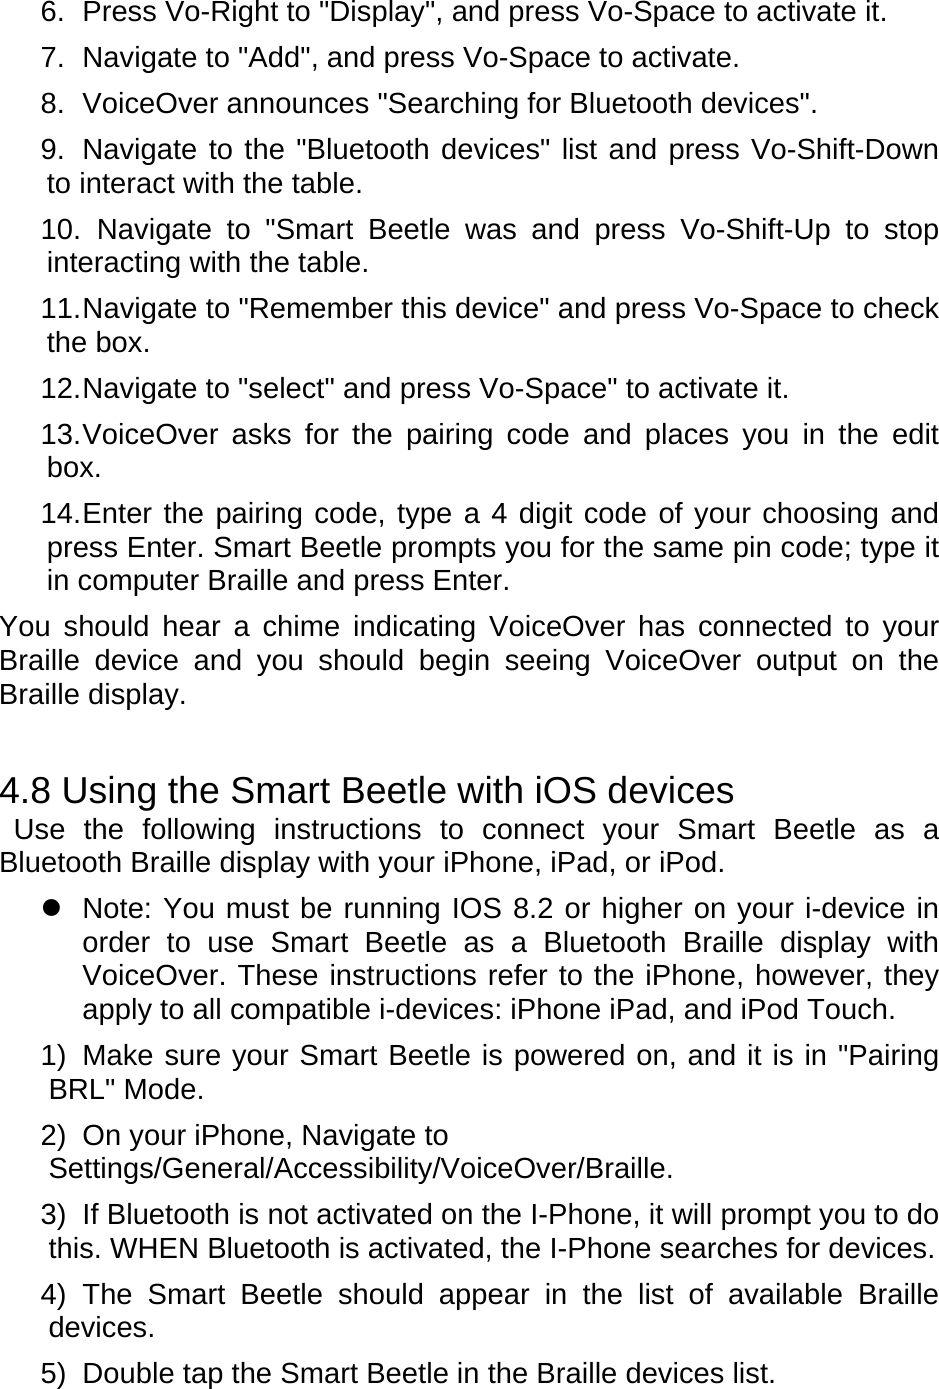 6.  Press Vo-Right to &quot;Display&quot;, and press Vo-Space to activate it. 7.  Navigate to &quot;Add&quot;, and press Vo-Space to activate. 8.  VoiceOver announces &quot;Searching for Bluetooth devices&quot;. 9.  Navigate to the &quot;Bluetooth devices&quot; list and press Vo-Shift-Down to interact with the table. 10.  Navigate to &quot;Smart Beetle was and press Vo-Shift-Up to stop interacting with the table. 11. Navigate to &quot;Remember this device&quot; and press Vo-Space to check the box. 12. Navigate to &quot;select&quot; and press Vo-Space&quot; to activate it. 13. VoiceOver asks for the pairing code and places you in the edit box. 14. Enter the pairing code, type a 4 digit code of your choosing and press Enter. Smart Beetle prompts you for the same pin code; type it in computer Braille and press Enter. You should hear a chime indicating VoiceOver has connected to your Braille device and you should begin seeing VoiceOver output on the Braille display.     4.8 Using the Smart Beetle with iOS devices  Use the following instructions to connect your Smart Beetle as a Bluetooth Braille display with your iPhone, iPad, or iPod.     Note: You must be running IOS 8.2 or higher on your i-device in order to use Smart Beetle as a Bluetooth Braille display with VoiceOver. These instructions refer to the iPhone, however, they apply to all compatible i-devices: iPhone iPad, and iPod Touch.   1)  Make sure your Smart Beetle is powered on, and it is in &quot;Pairing BRL&quot; Mode. 2)  On your iPhone, Navigate to Settings/General/Accessibility/VoiceOver/Braille. 3)  If Bluetooth is not activated on the I-Phone, it will prompt you to do this. WHEN Bluetooth is activated, the I-Phone searches for devices. 4) The Smart Beetle should appear in the list of available Braille devices. 5)  Double tap the Smart Beetle in the Braille devices list. 